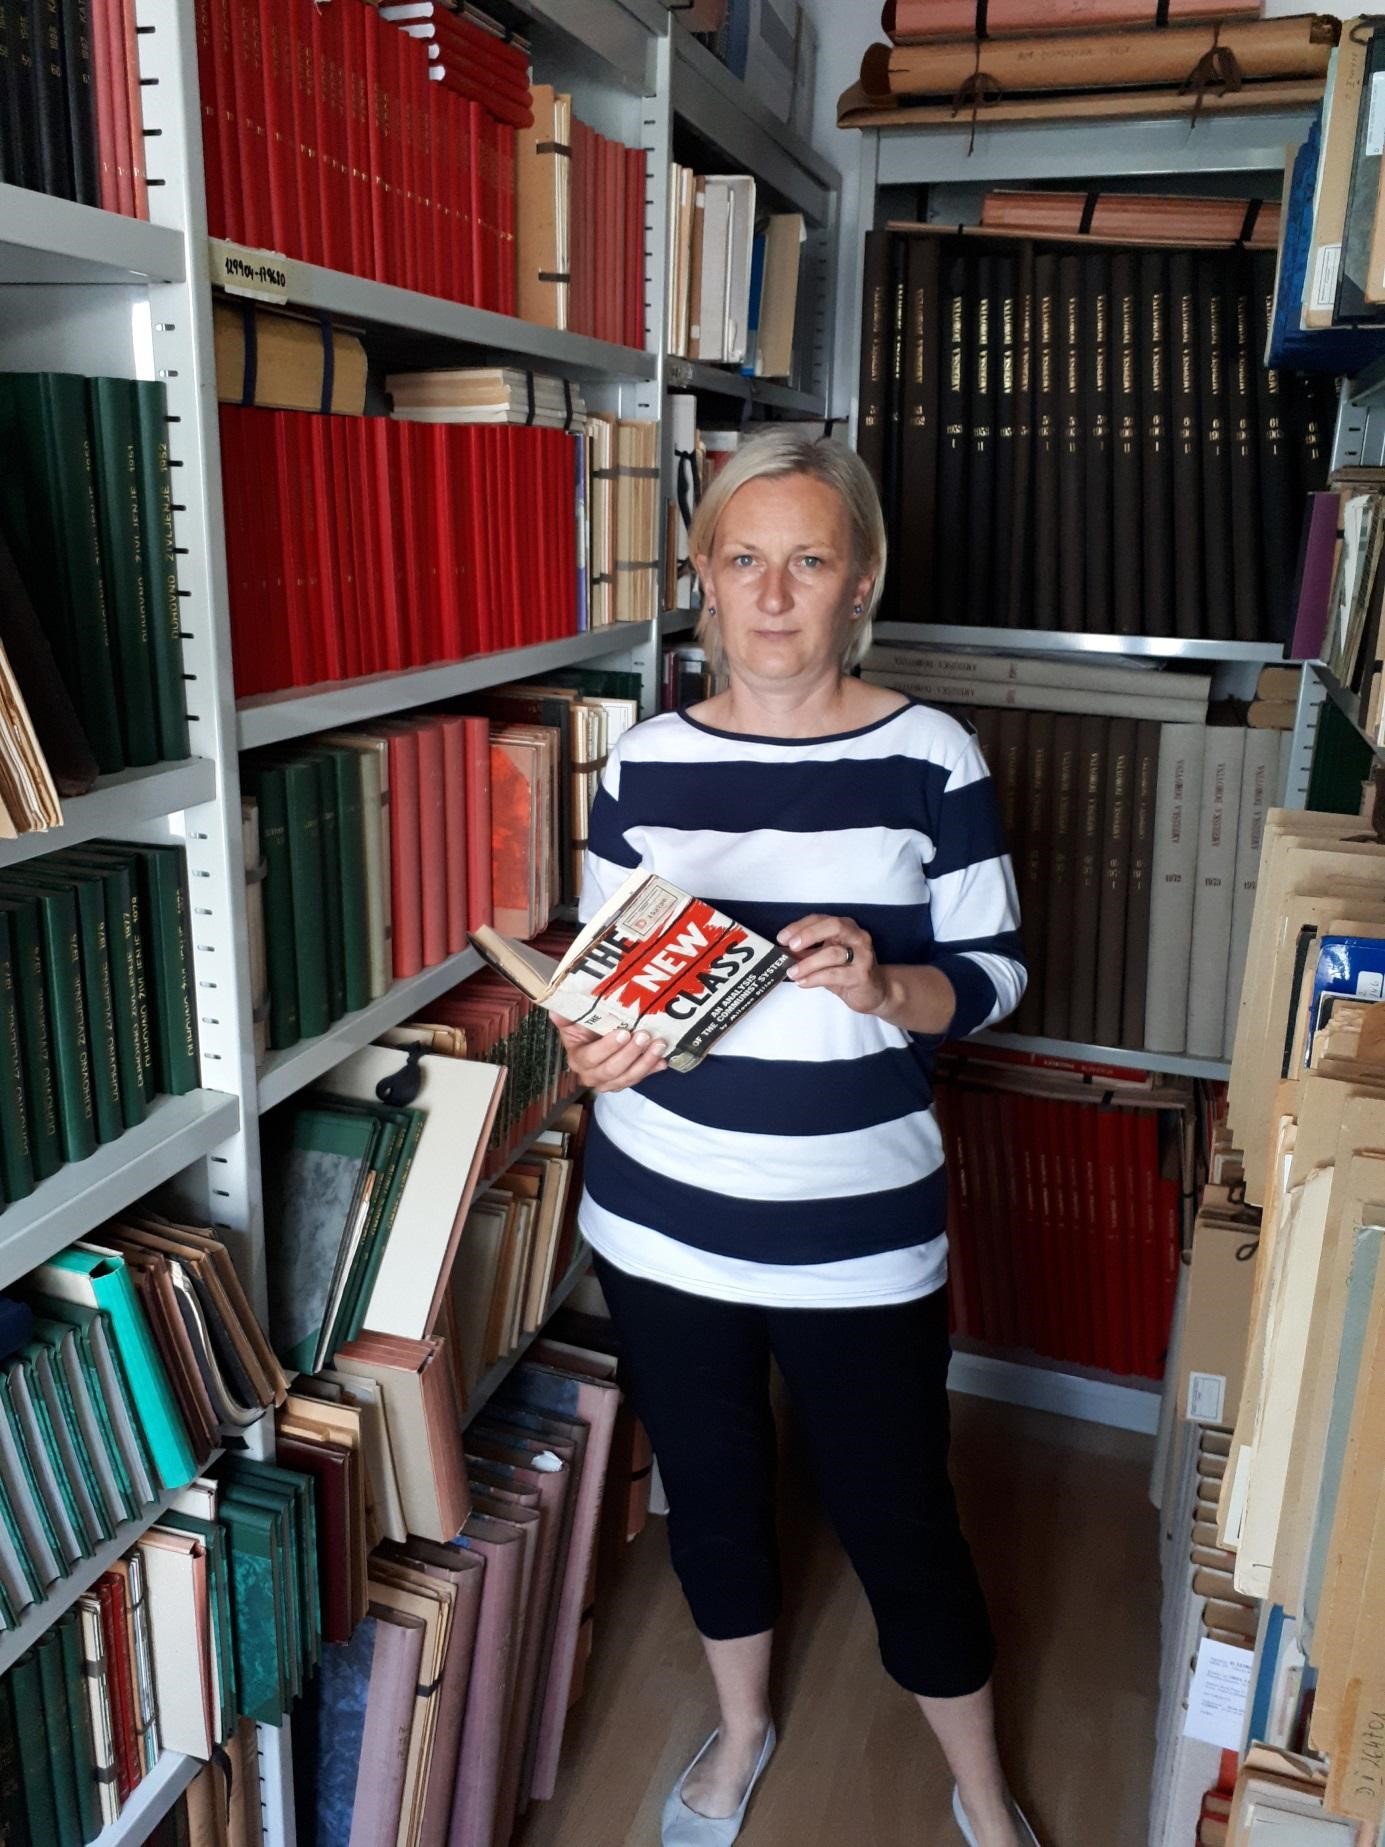 Helena Janežič and D-fund in the background, which is located in the Collections of the Slovenian Press Outside of the Republic of Slovenia in the National and University Library in Ljubljana (2018-05-24).